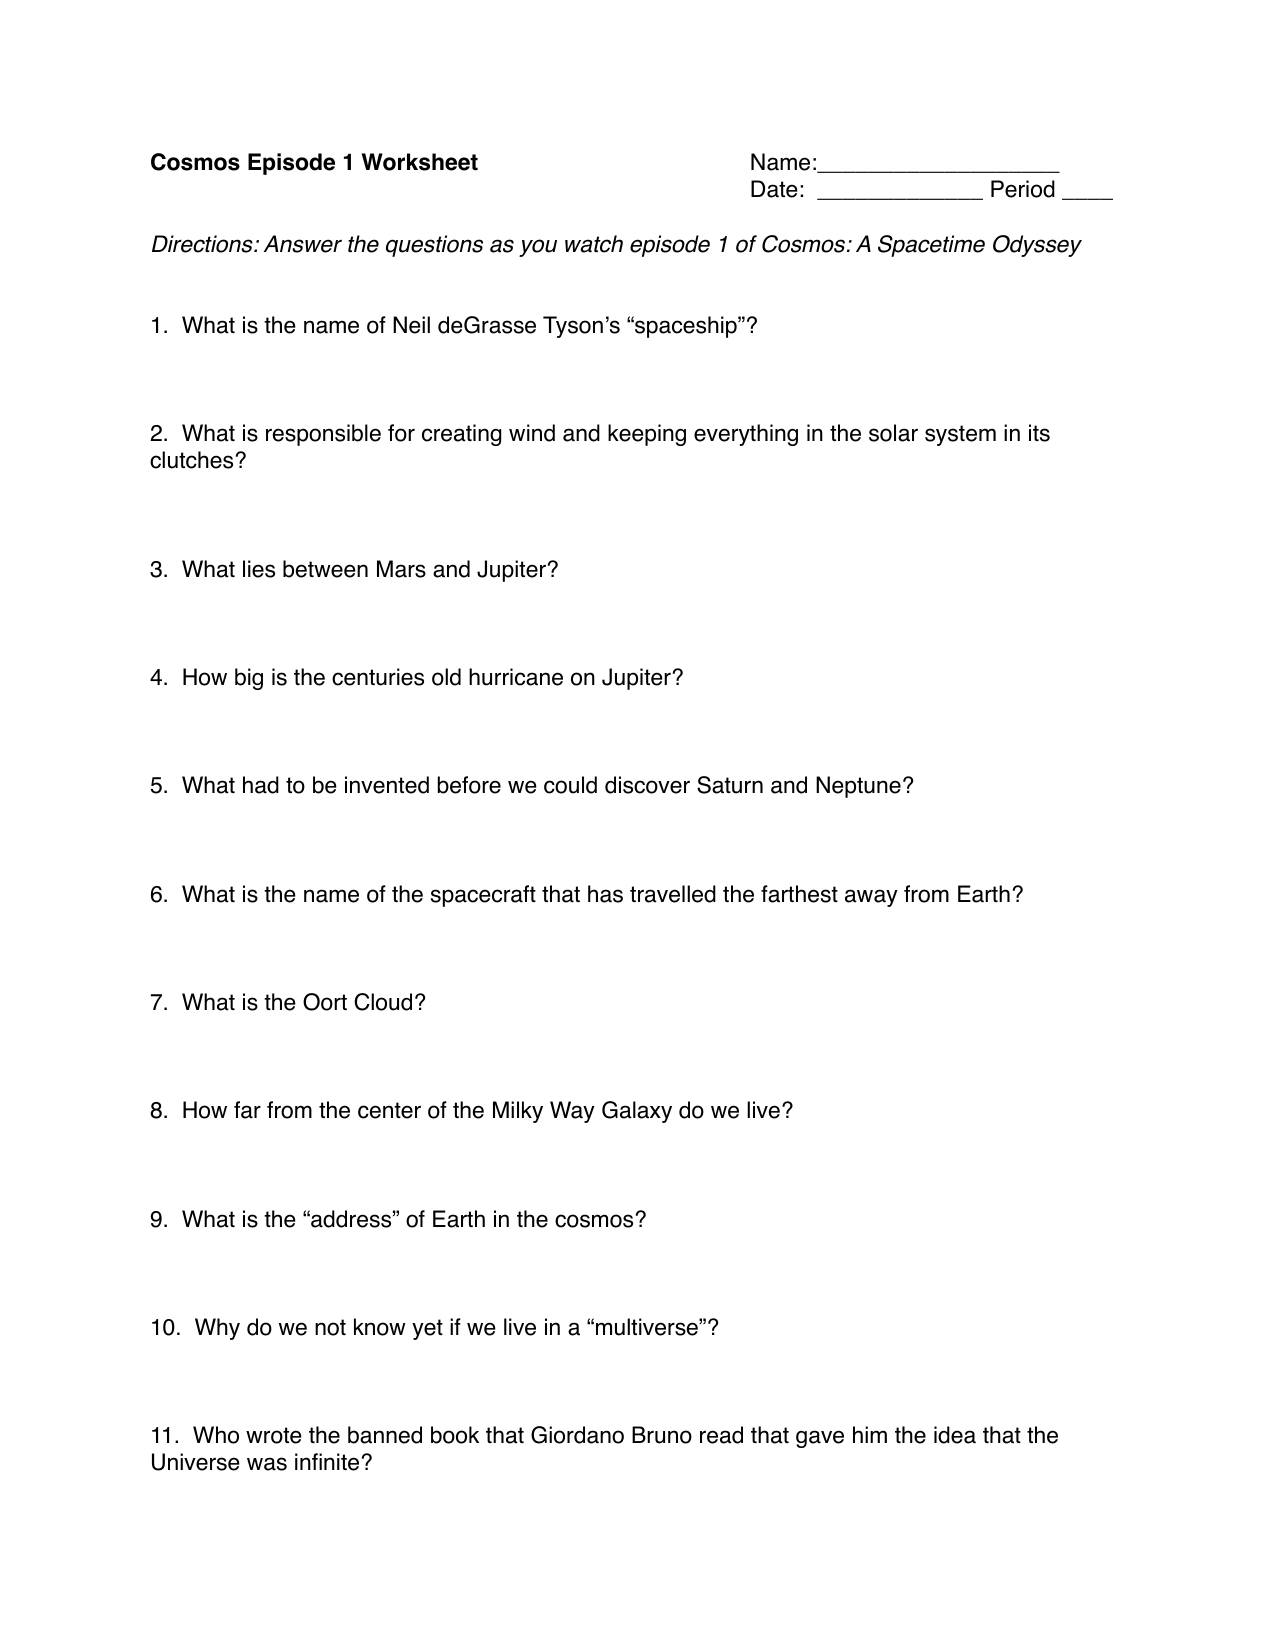 Cosmos Episode 22 With Cosmos Episode 1 Worksheet Answers